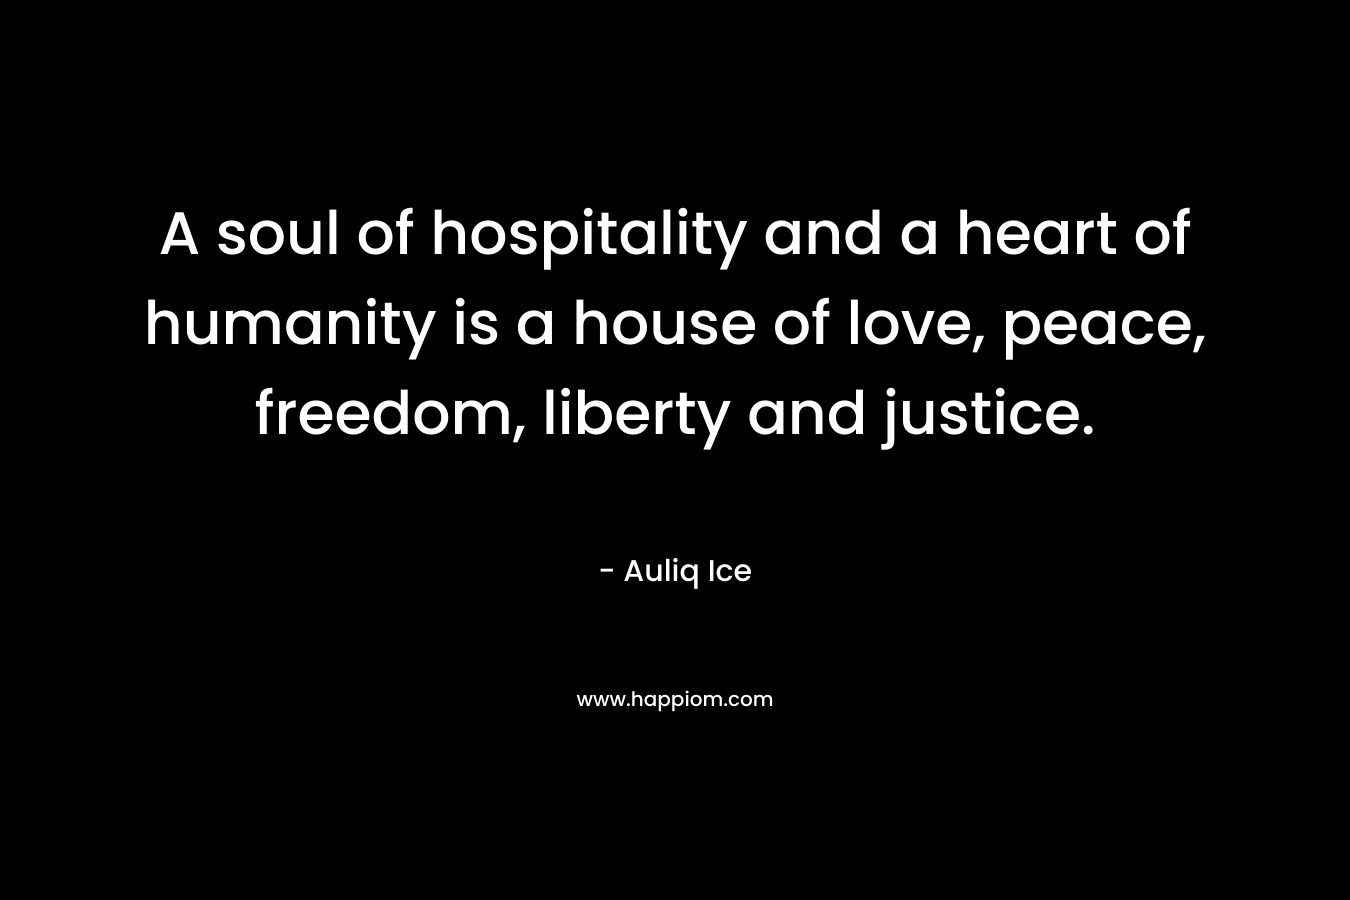 A soul of hospitality and a heart of humanity is a house of love, peace, freedom, liberty and justice. – Auliq Ice